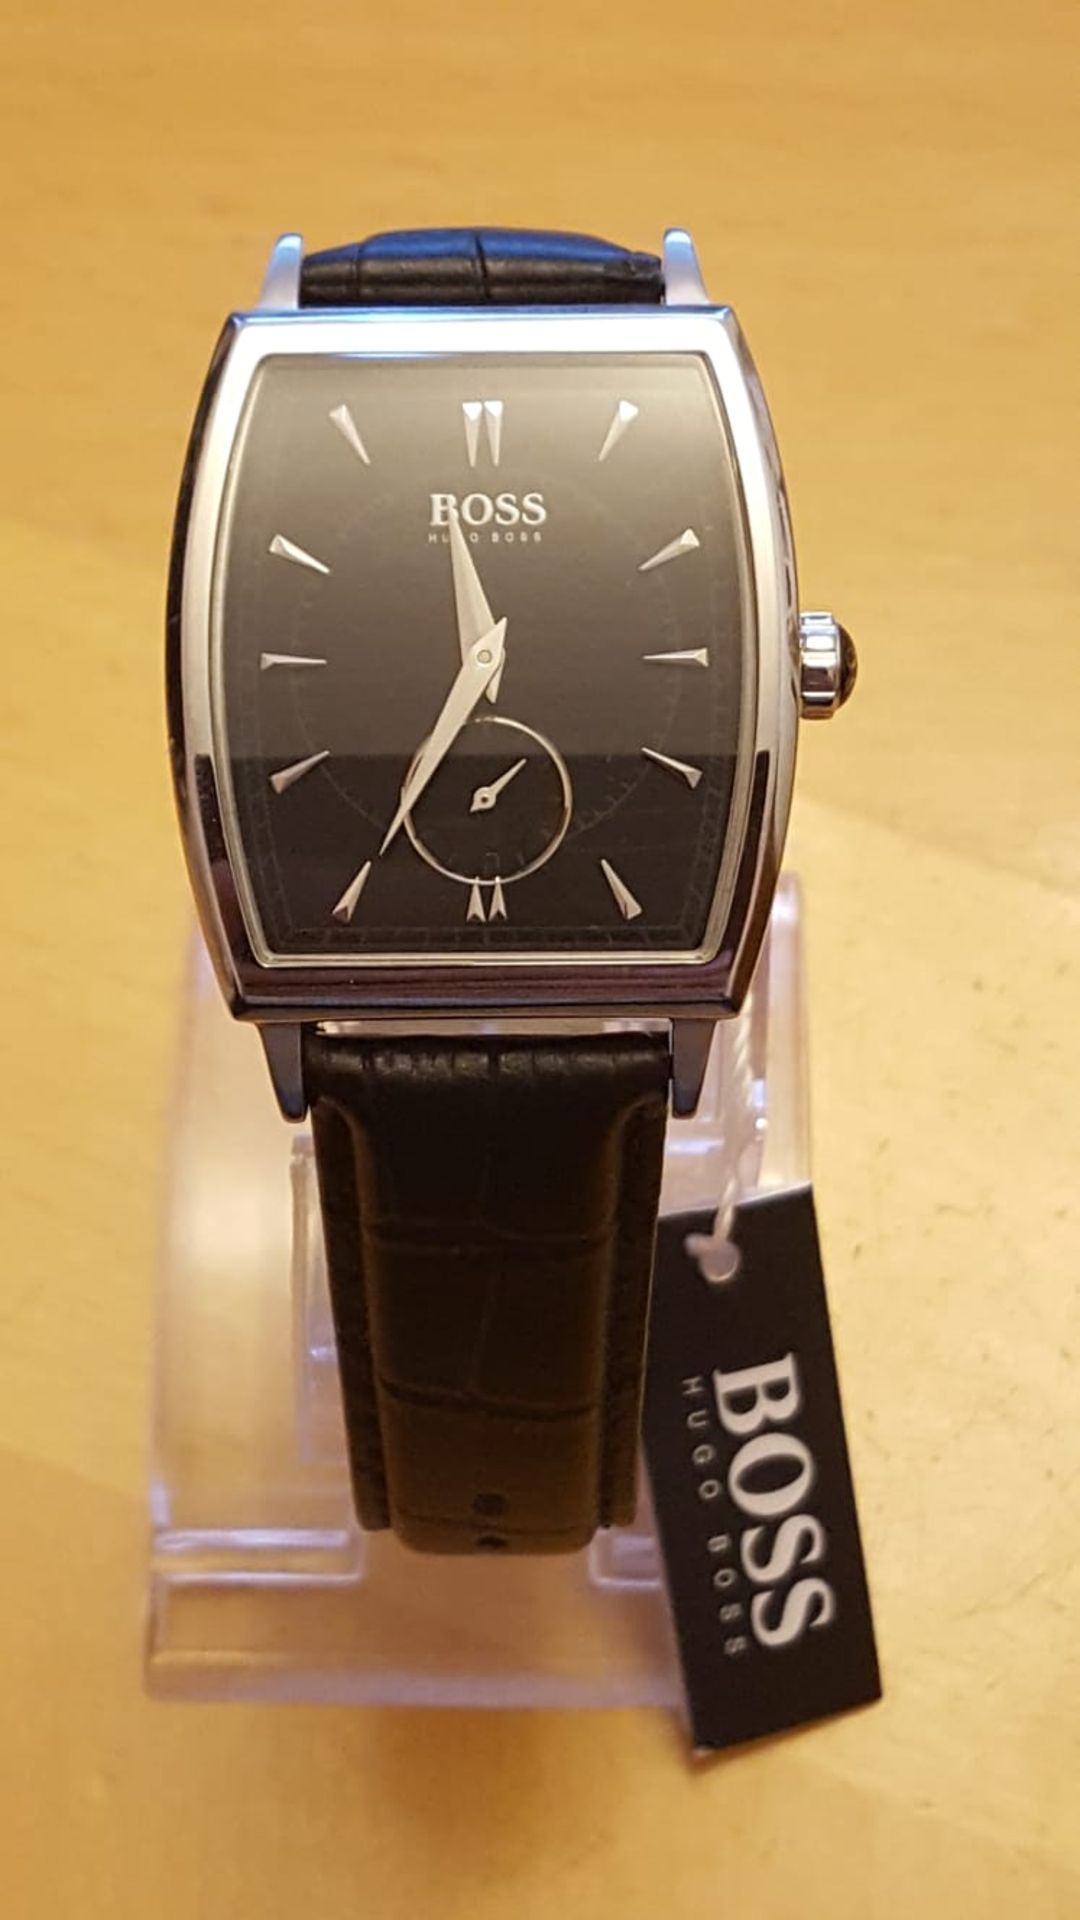 Brand New Hugo Boss Mens Classic Watch, Hb1512845, Black Dial And Black Leather Strap, Complete With